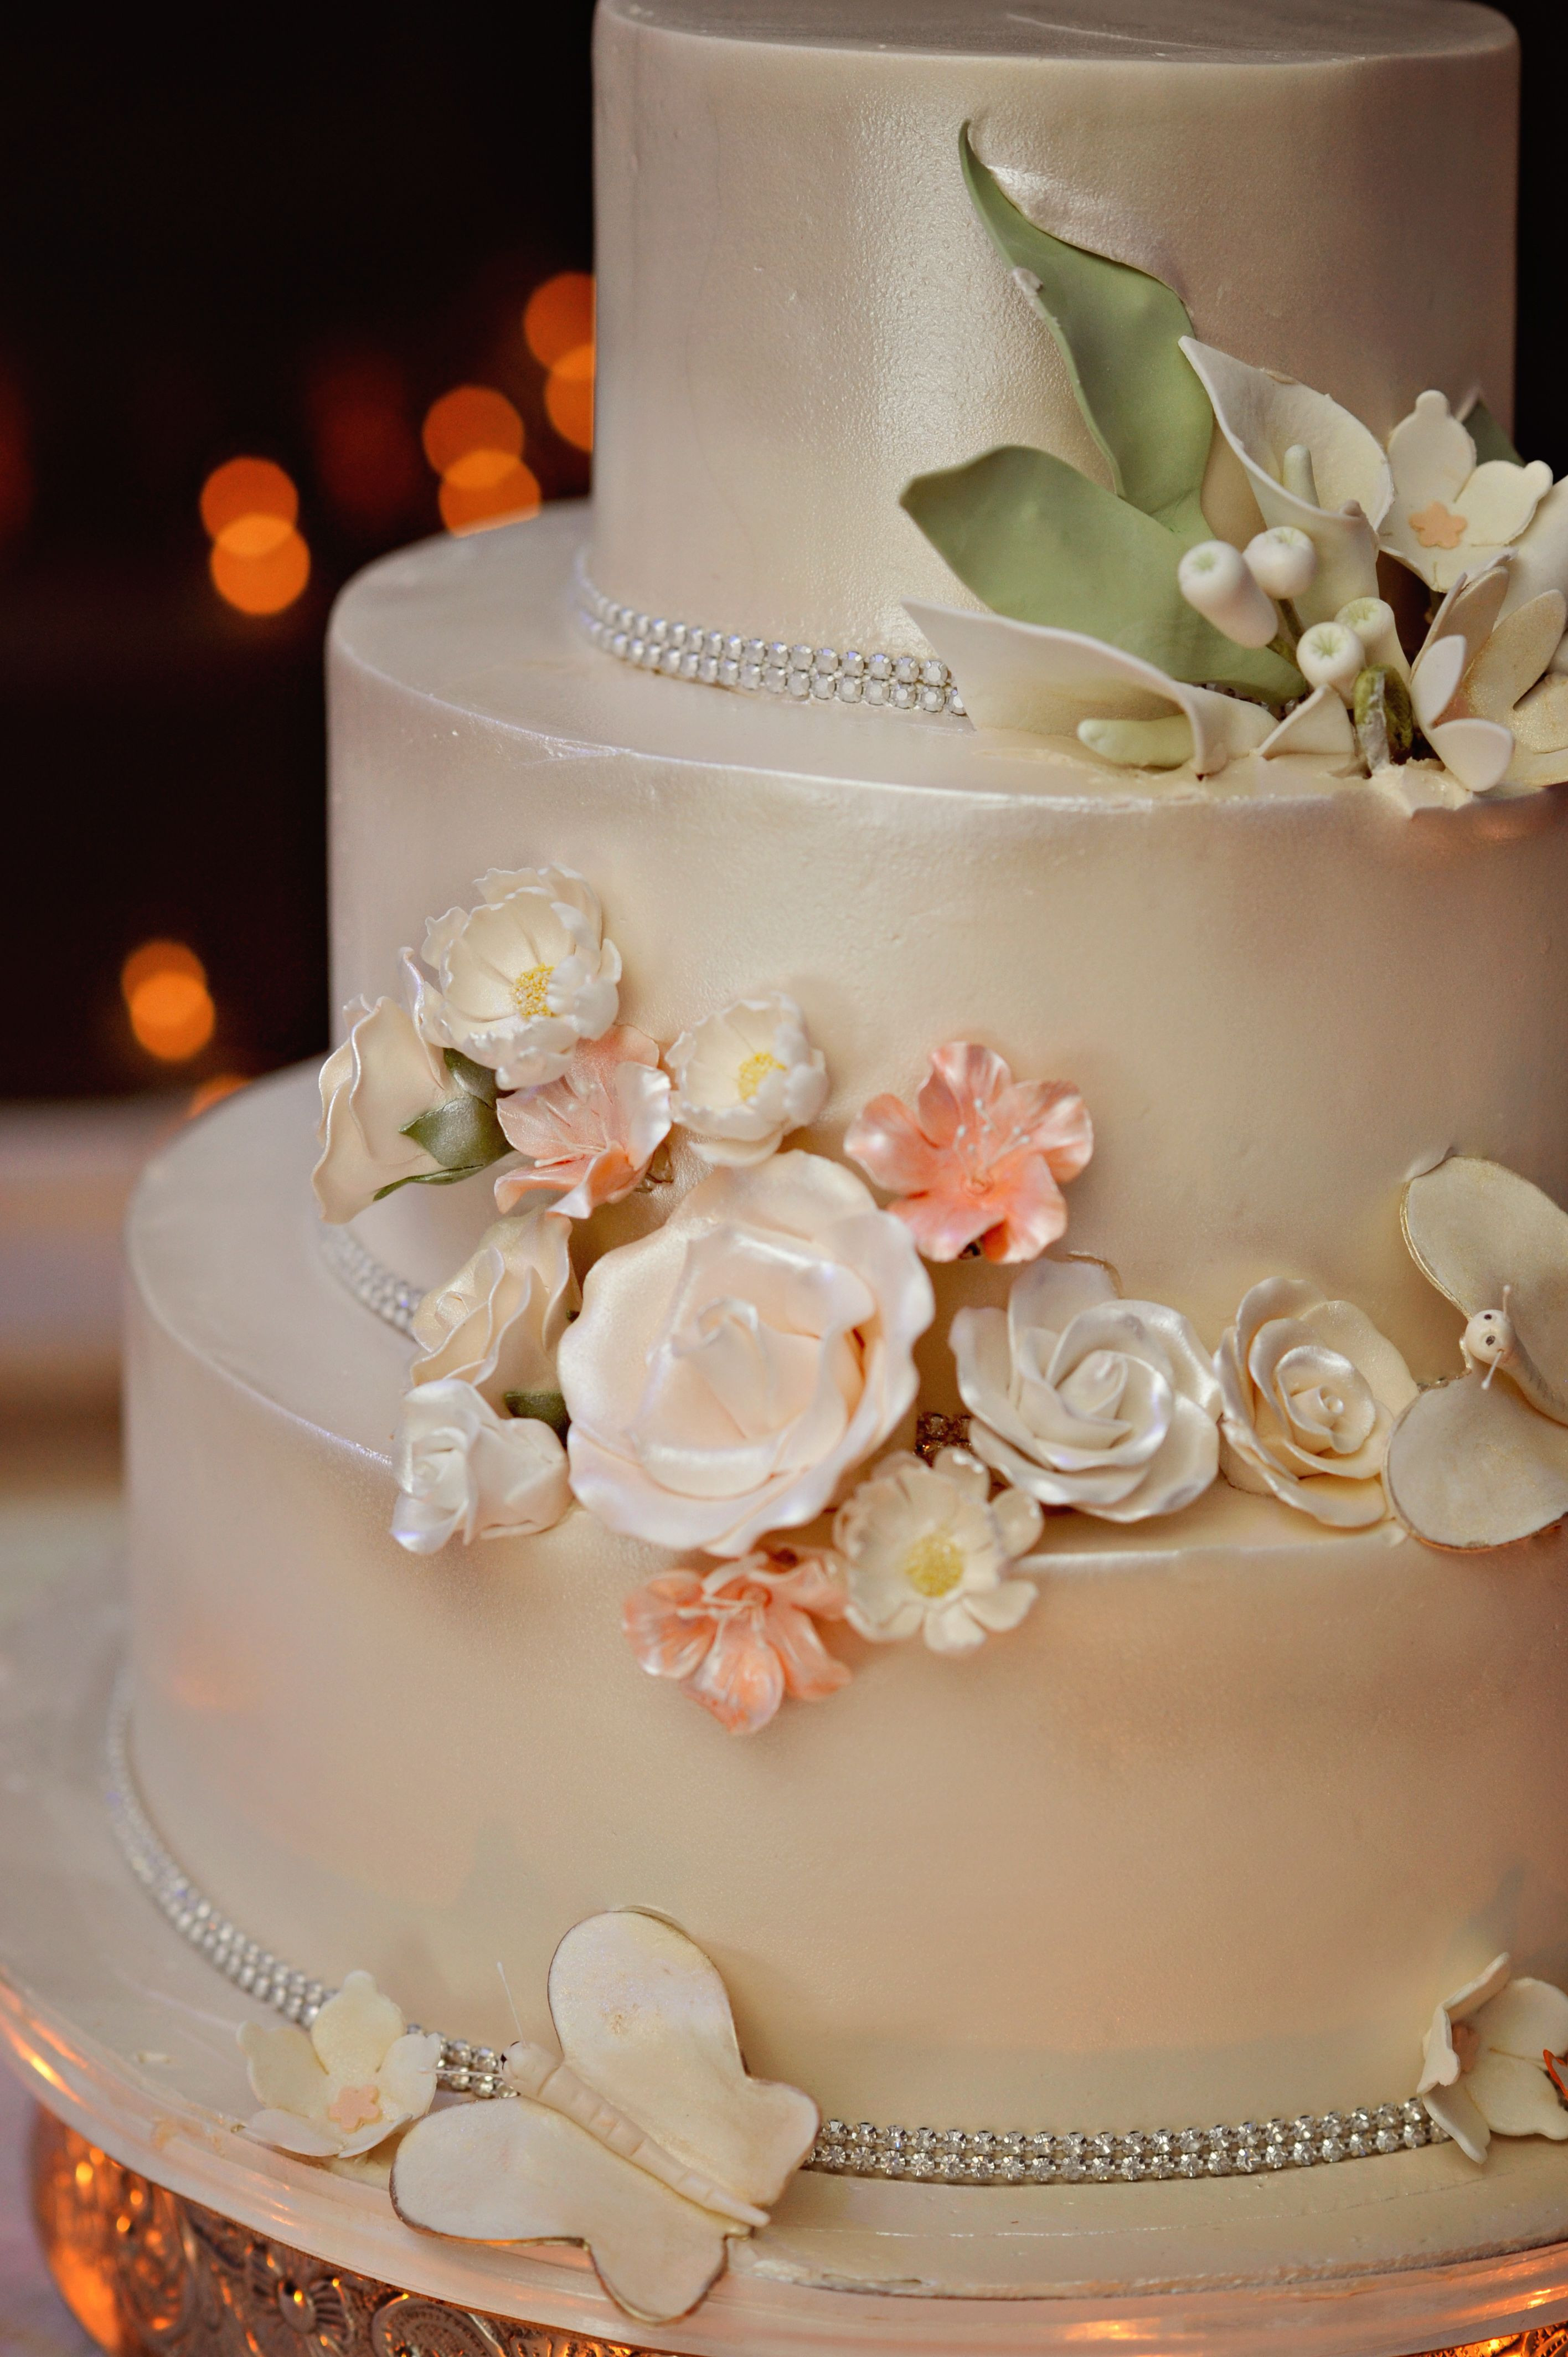 Champagne Coloured Wedding Cakes
 Three Tier Wedding Cake With Champagne Colored Luster Dust